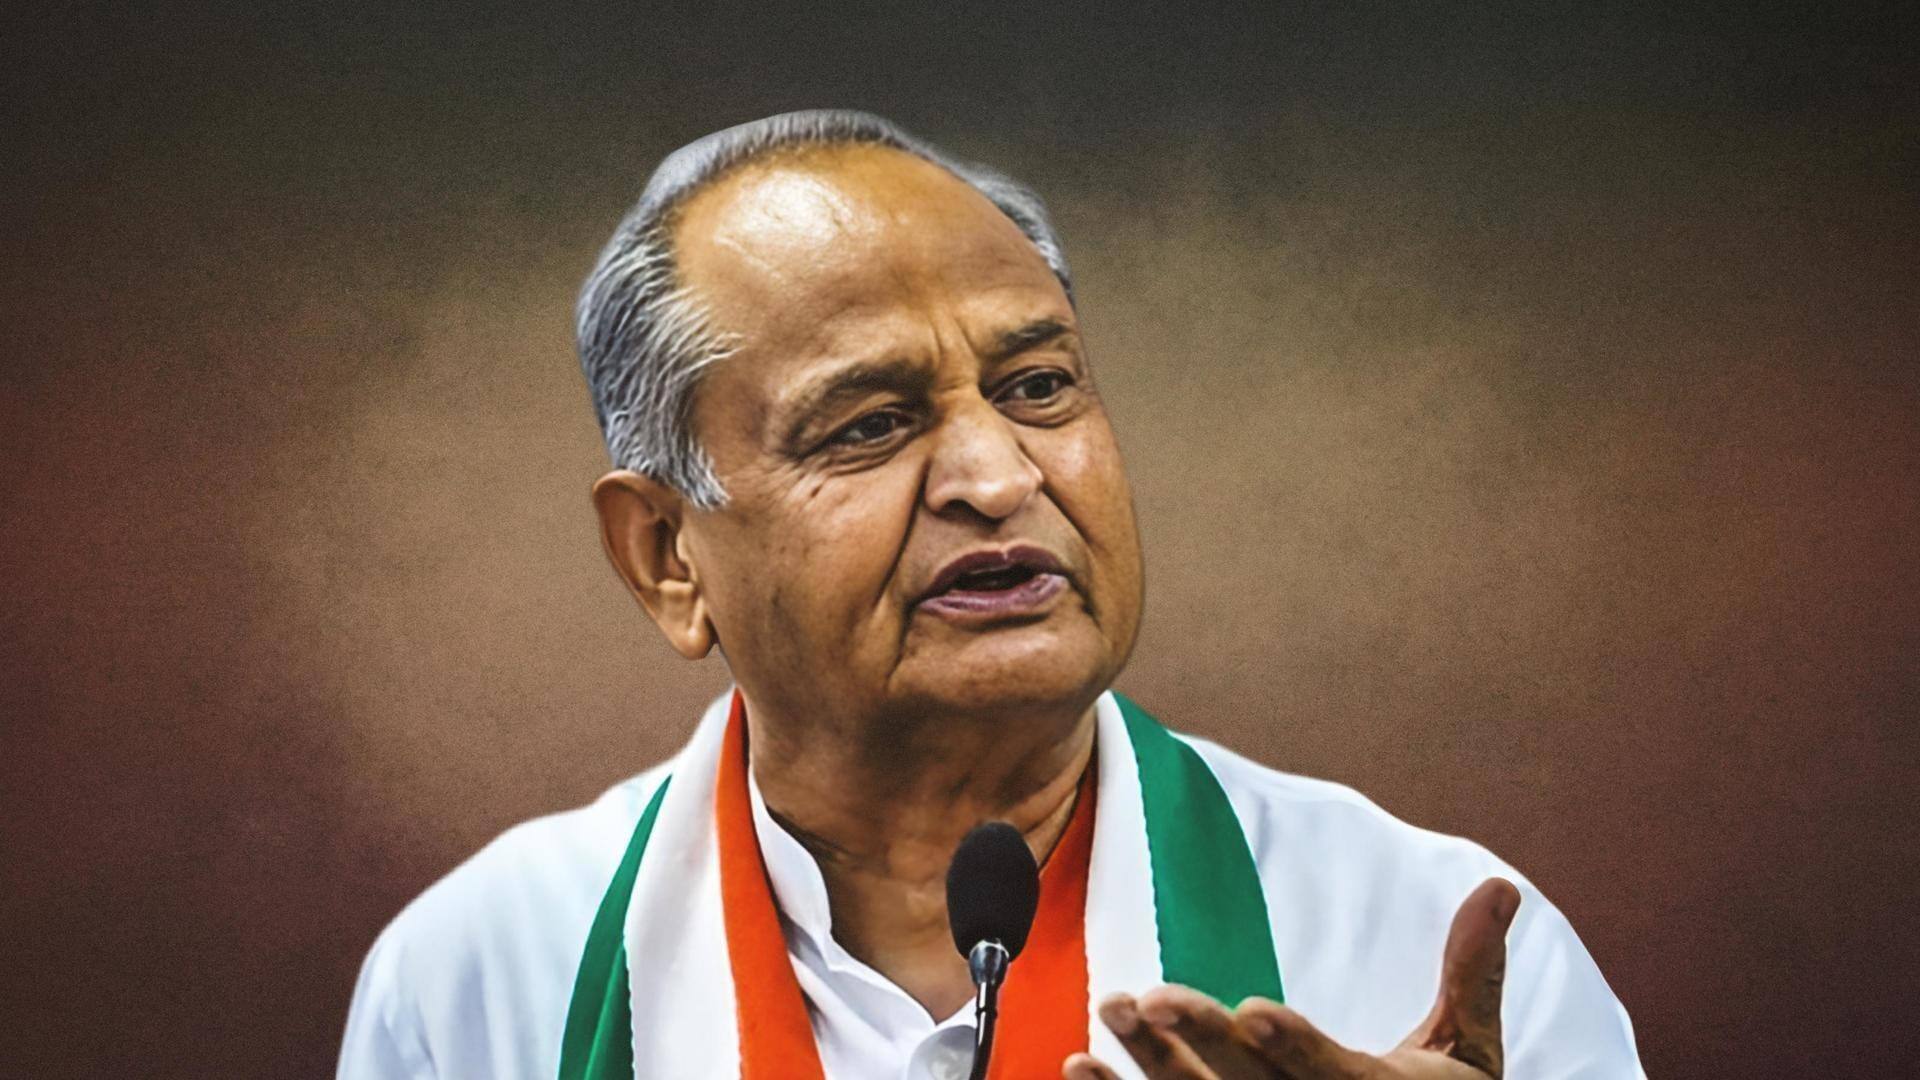 Rajasthan assembly polls: Want to leave CM's post, says Gehlot